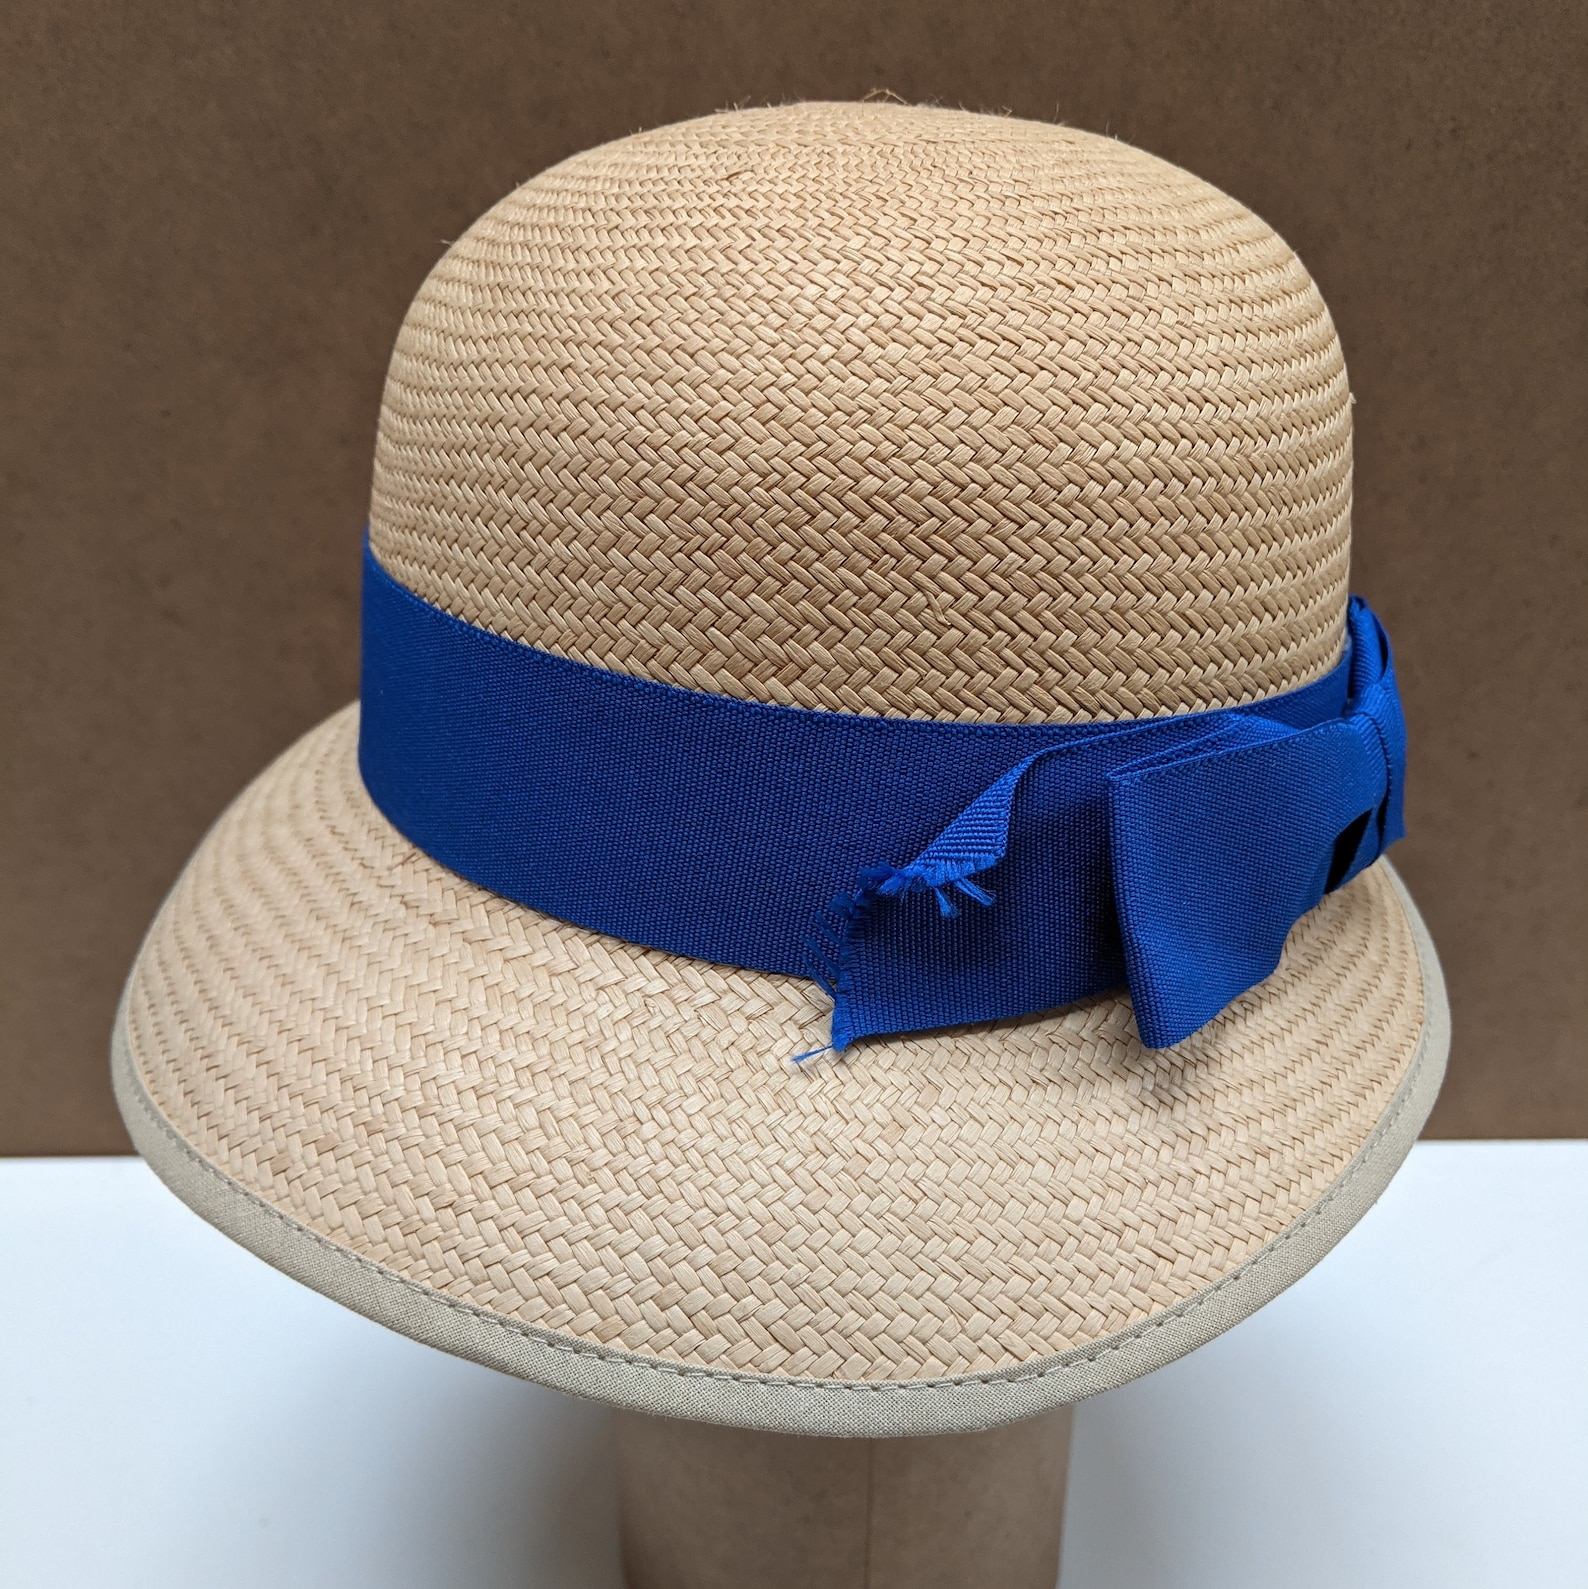 Handmade Ladies Panama Hat With Blue Band and Bow Cream | Etsy